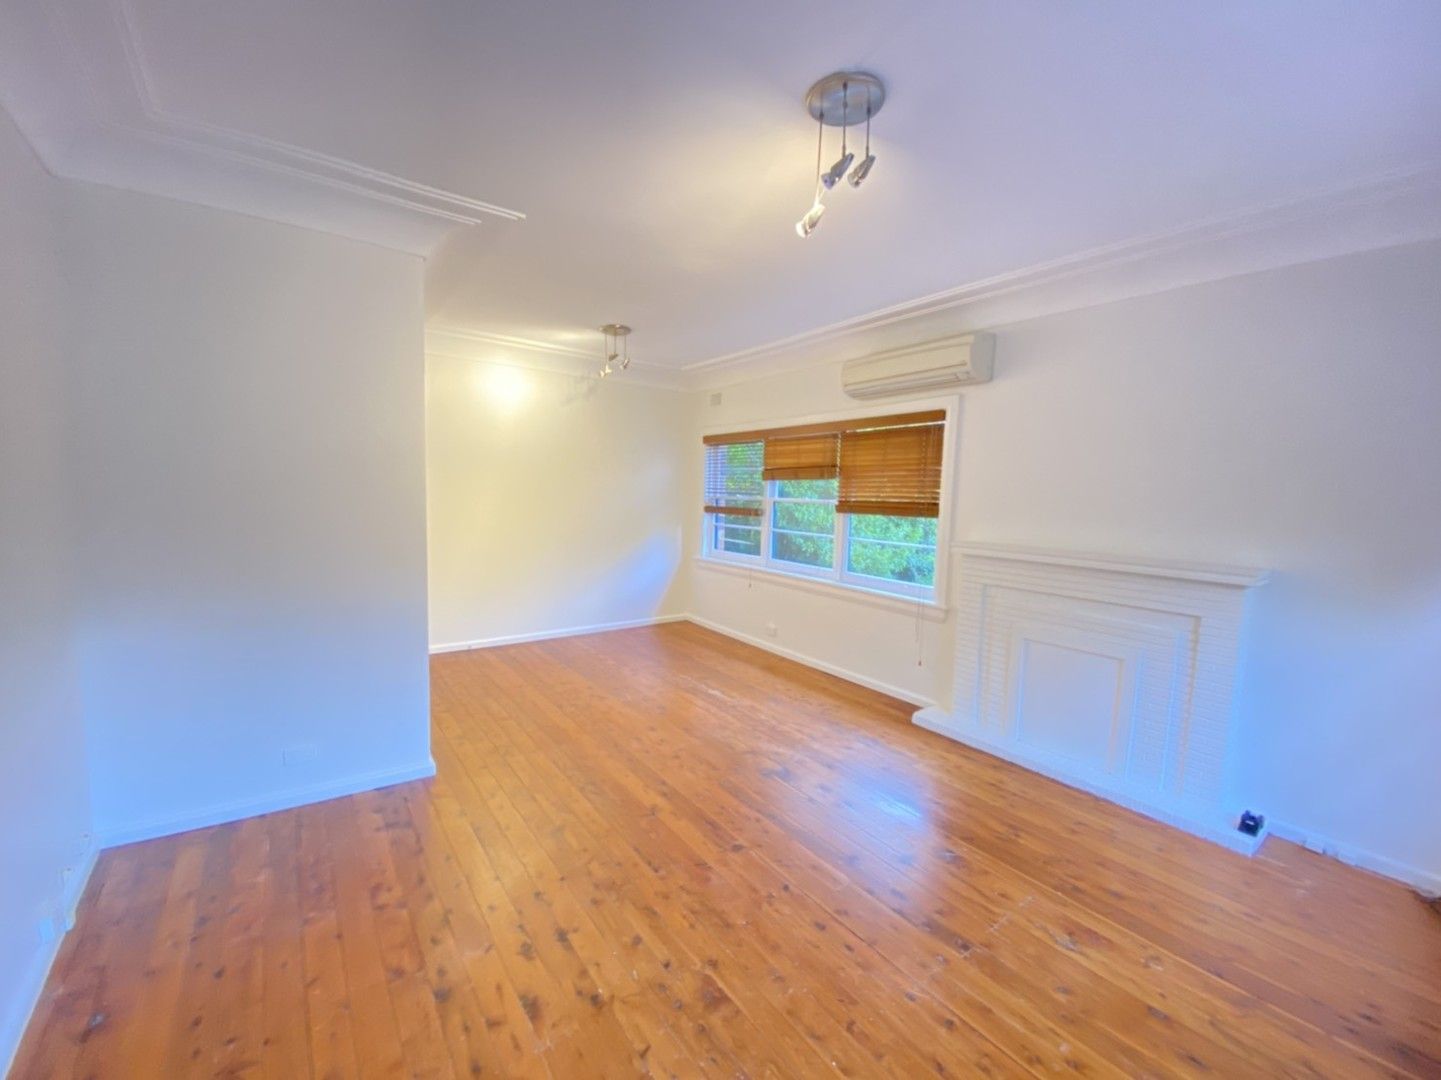 2 bedrooms House in 48 Wood Street LANE COVE WEST NSW, 2066